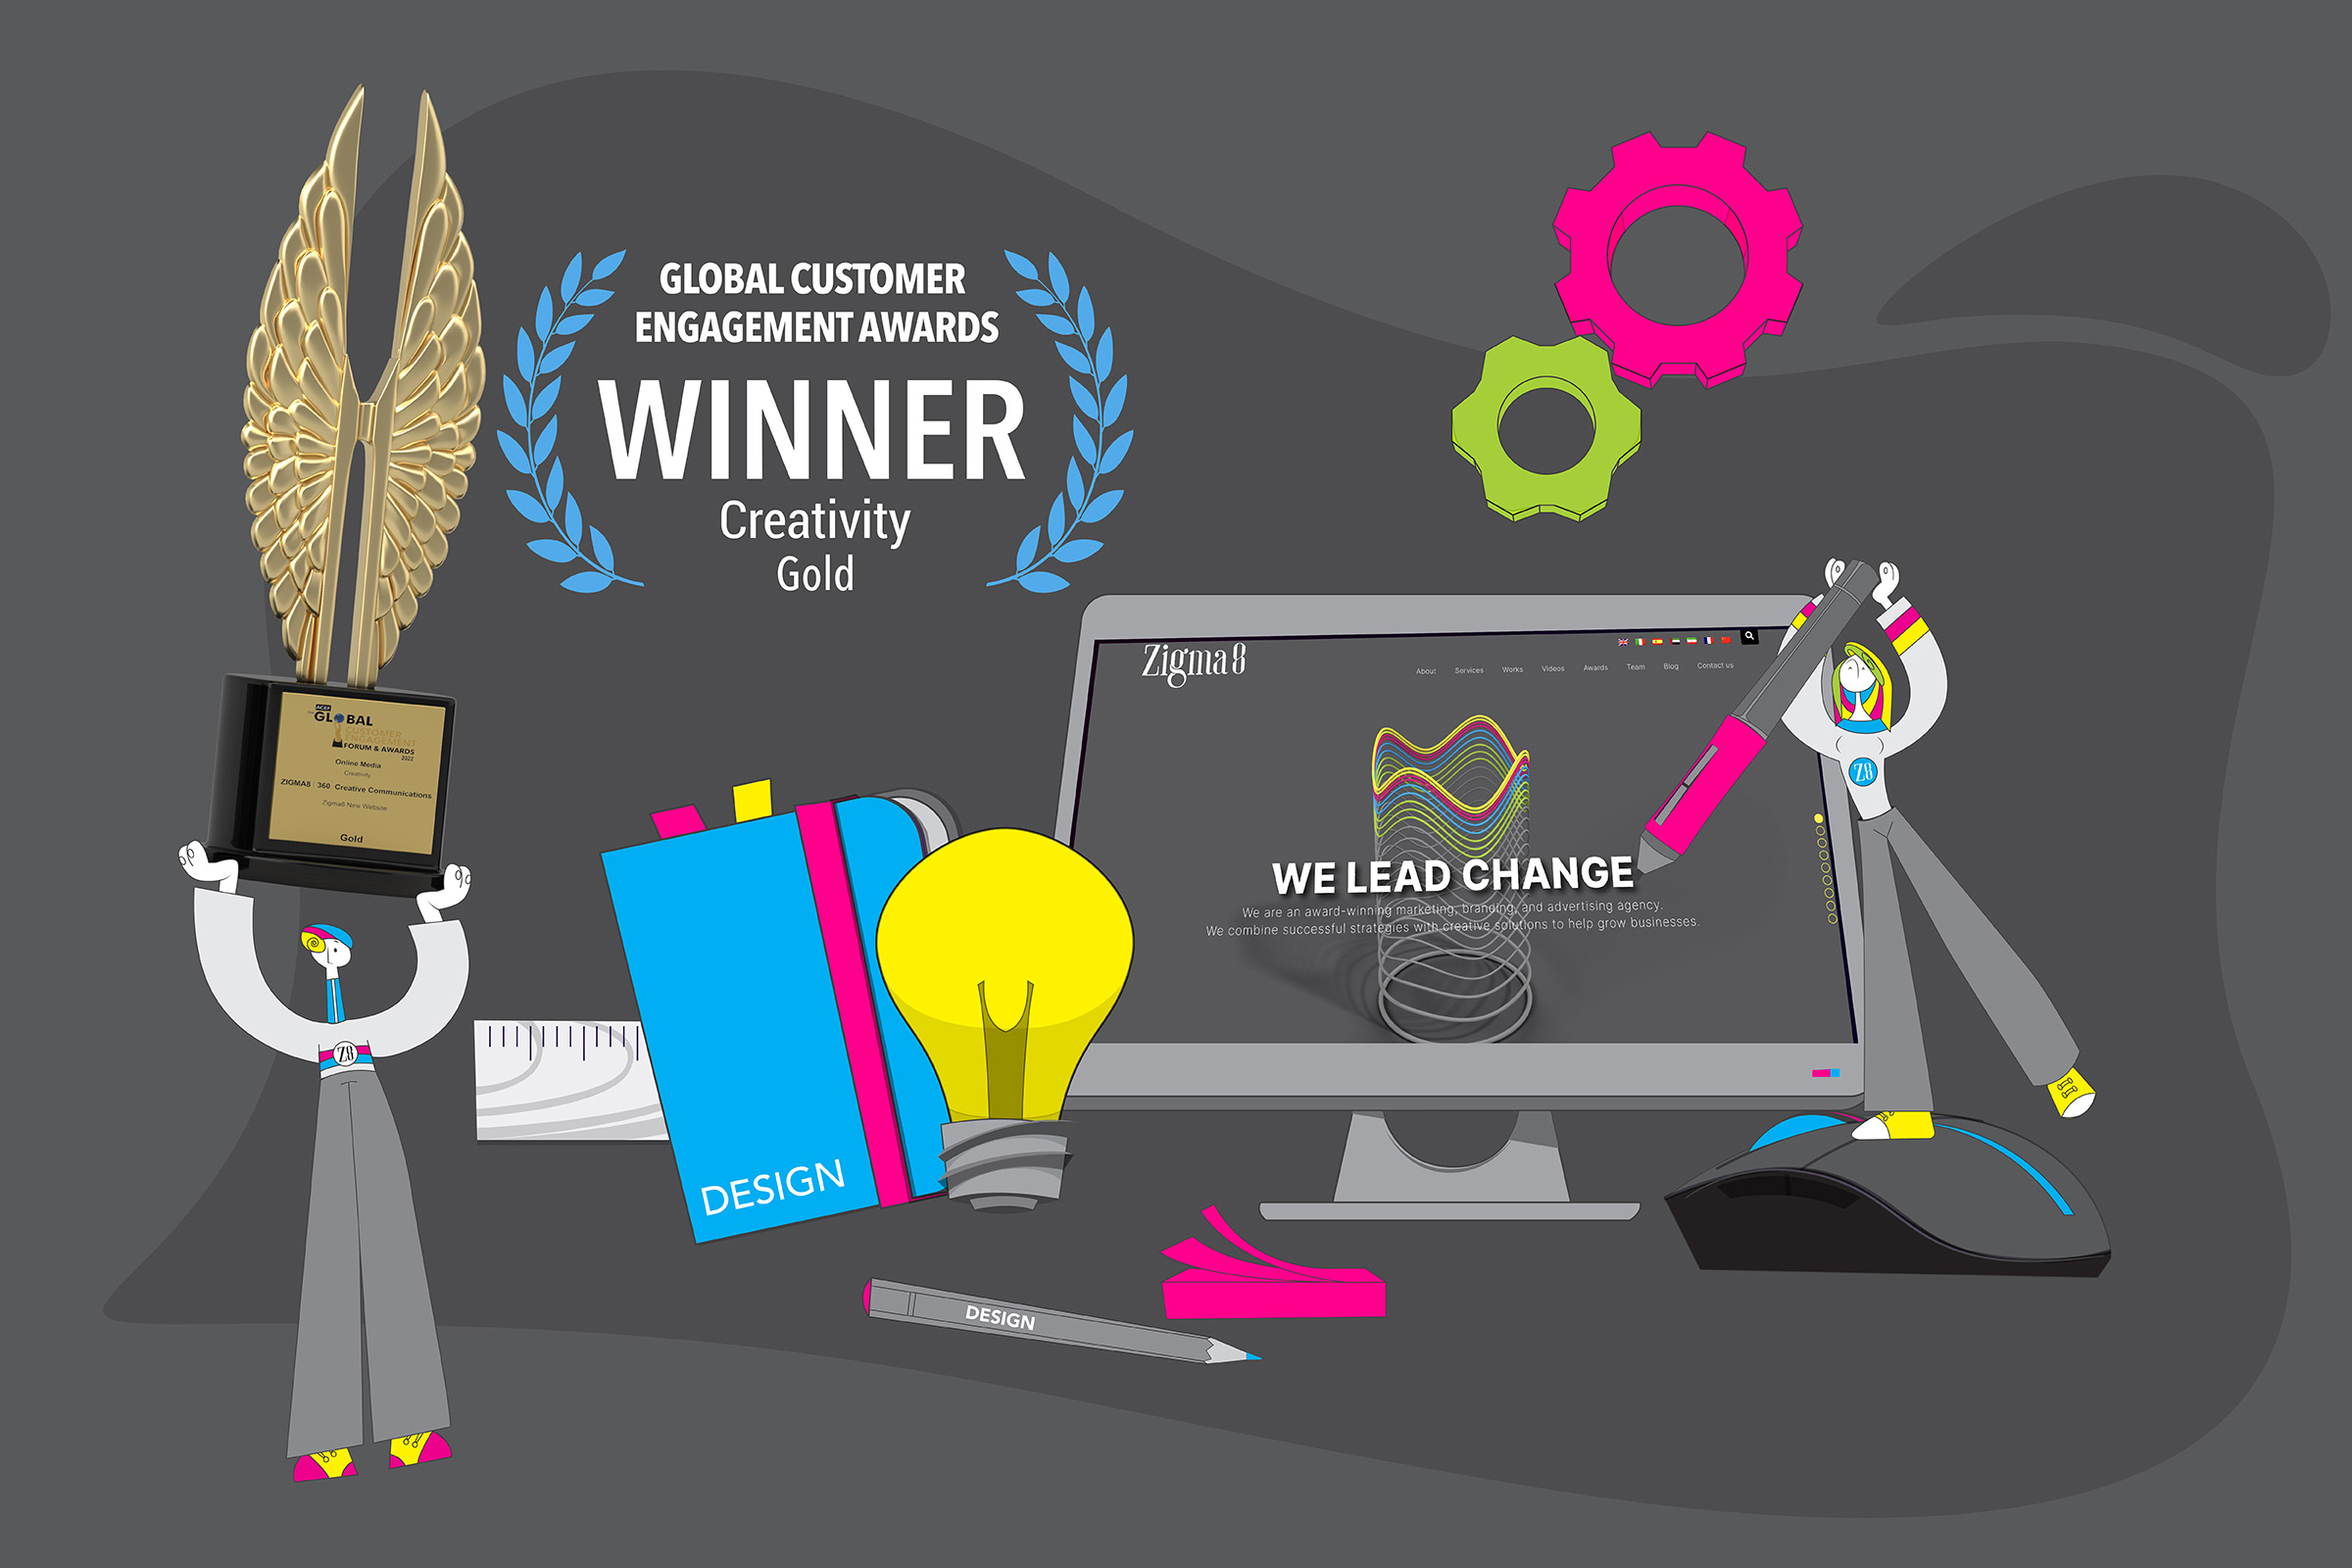 Zigma8 won the gold ACEF award in the category of online media creativity for its website relaunch.